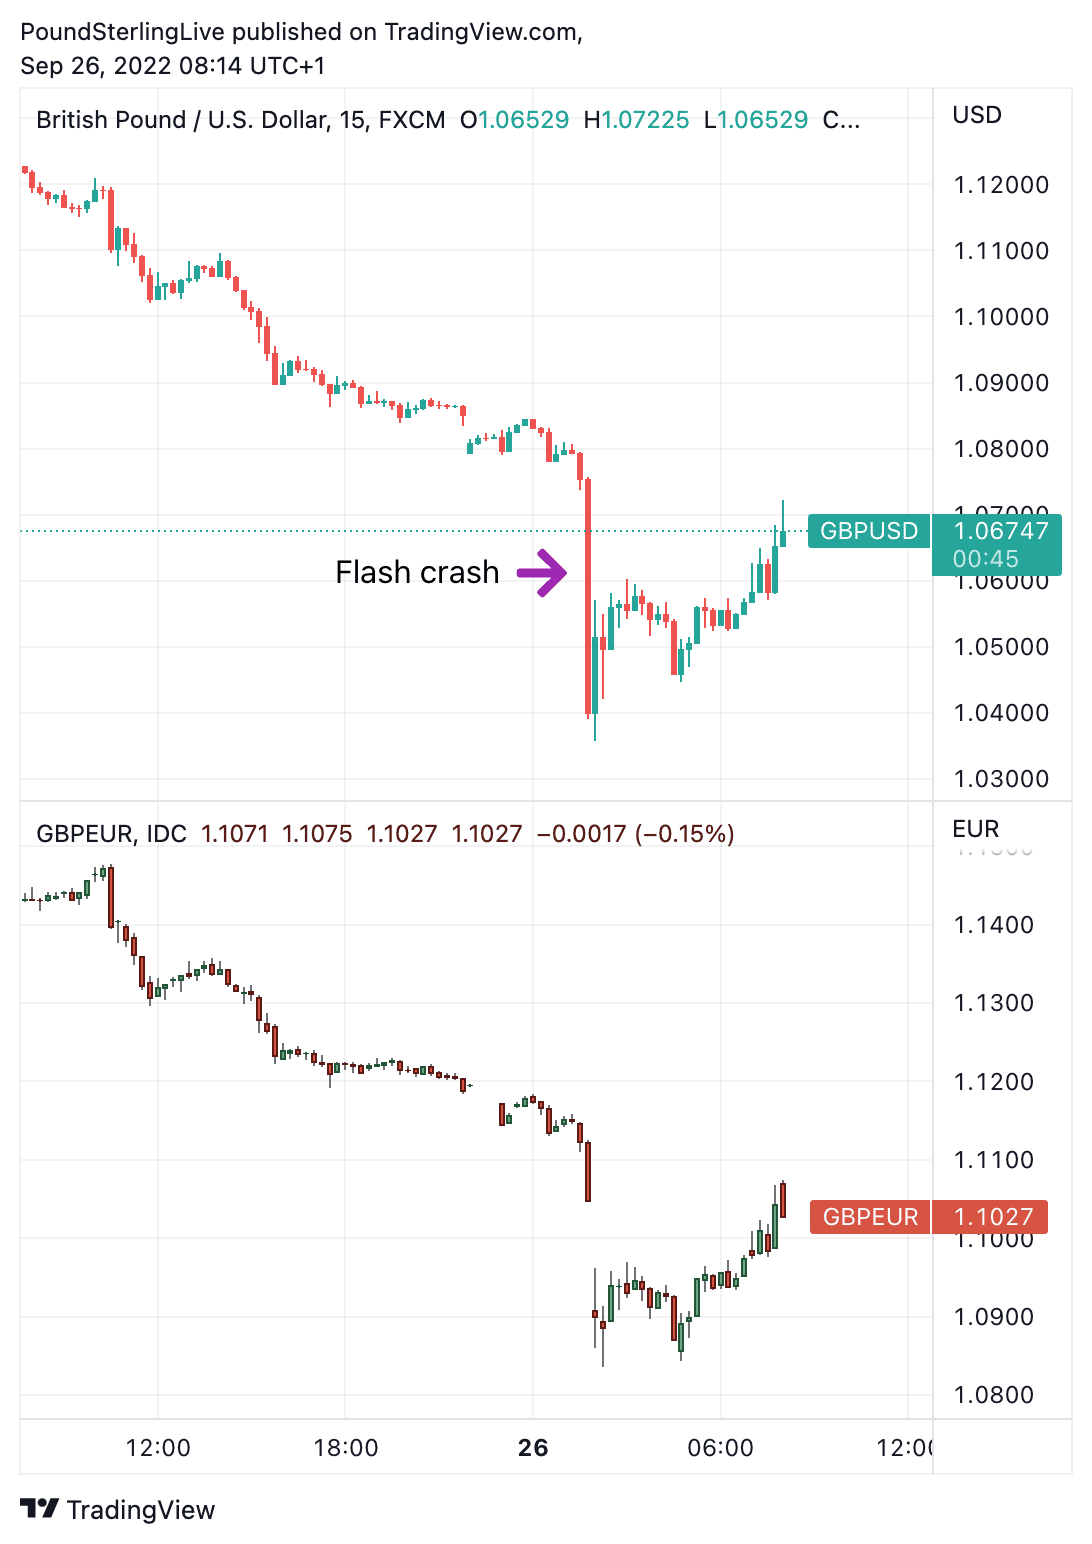 Pound in recovery mode